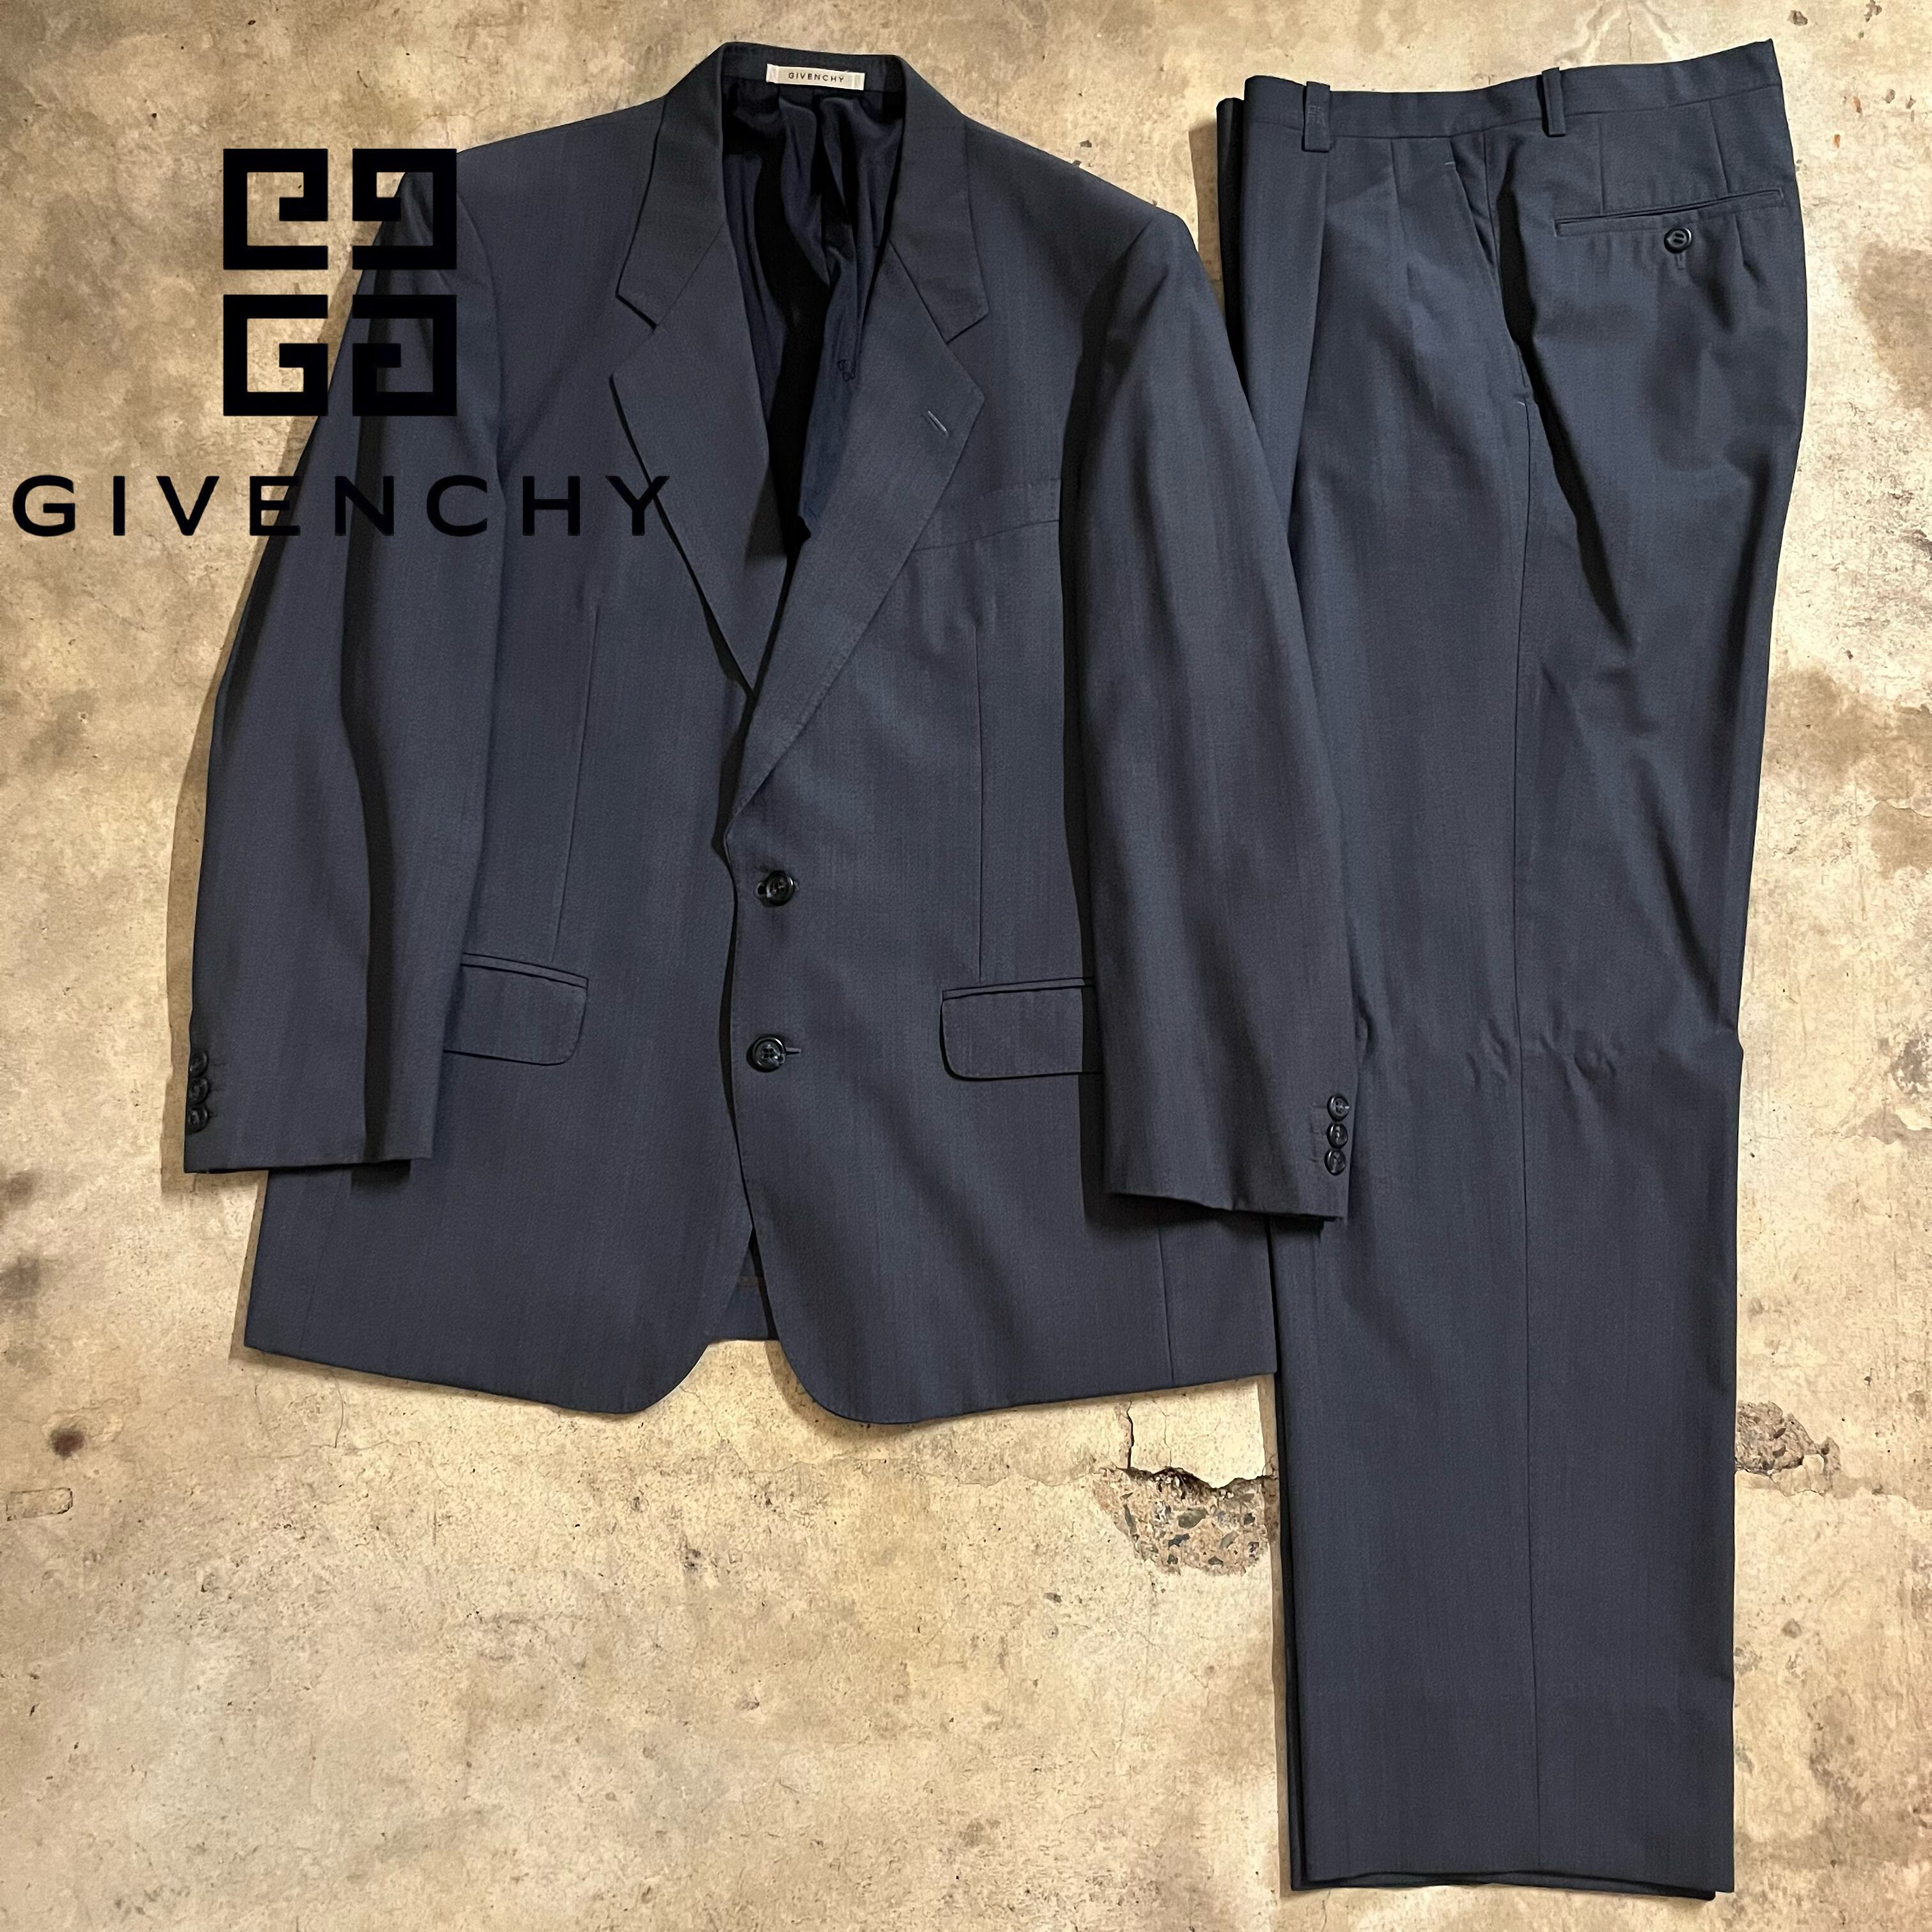 〖GIVENCHY〗mohair blend wool setup suit/ジバンシー モヘア混 ウール セットアップ スーツ/lsize